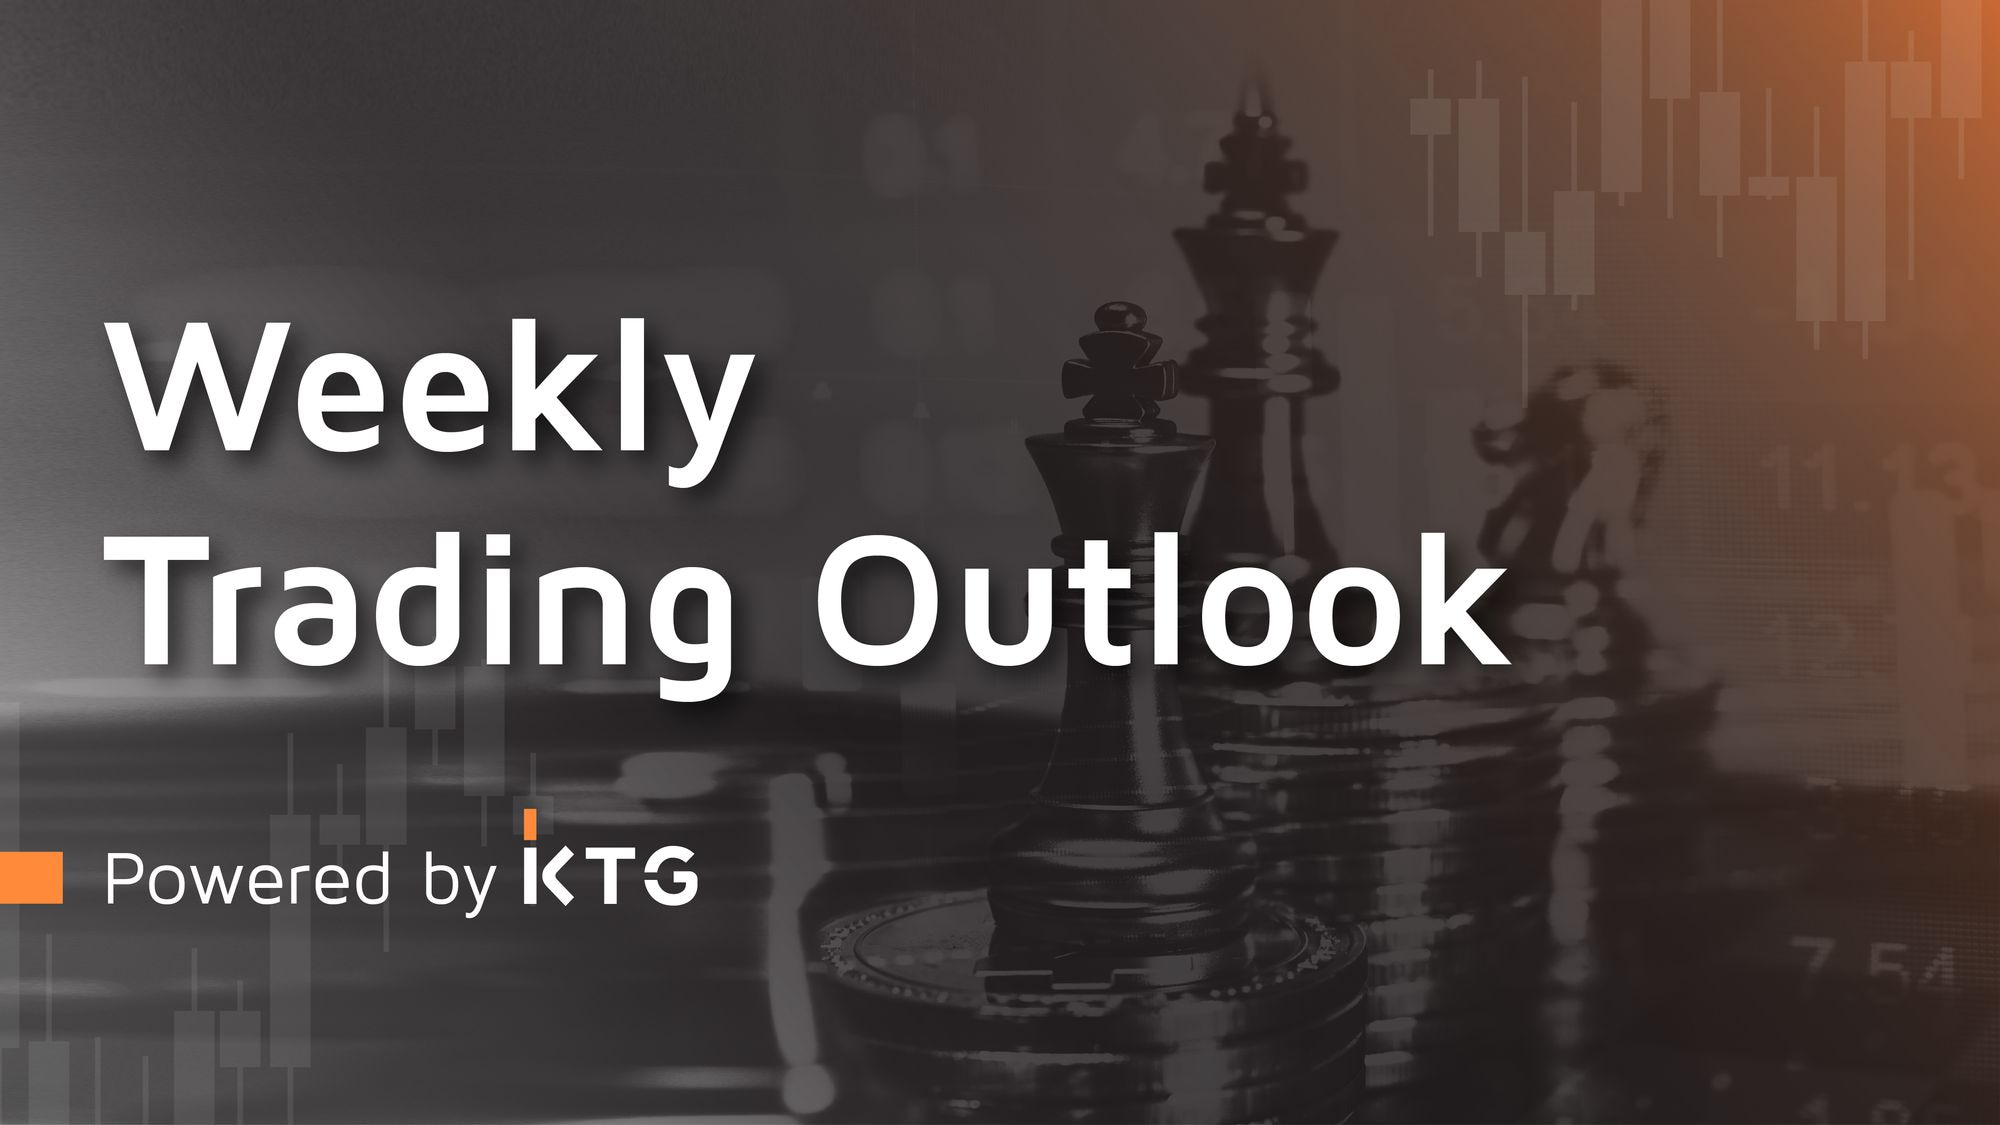 Will the bulls stay in control of the market? #TradingOutlook - Powered by KTG